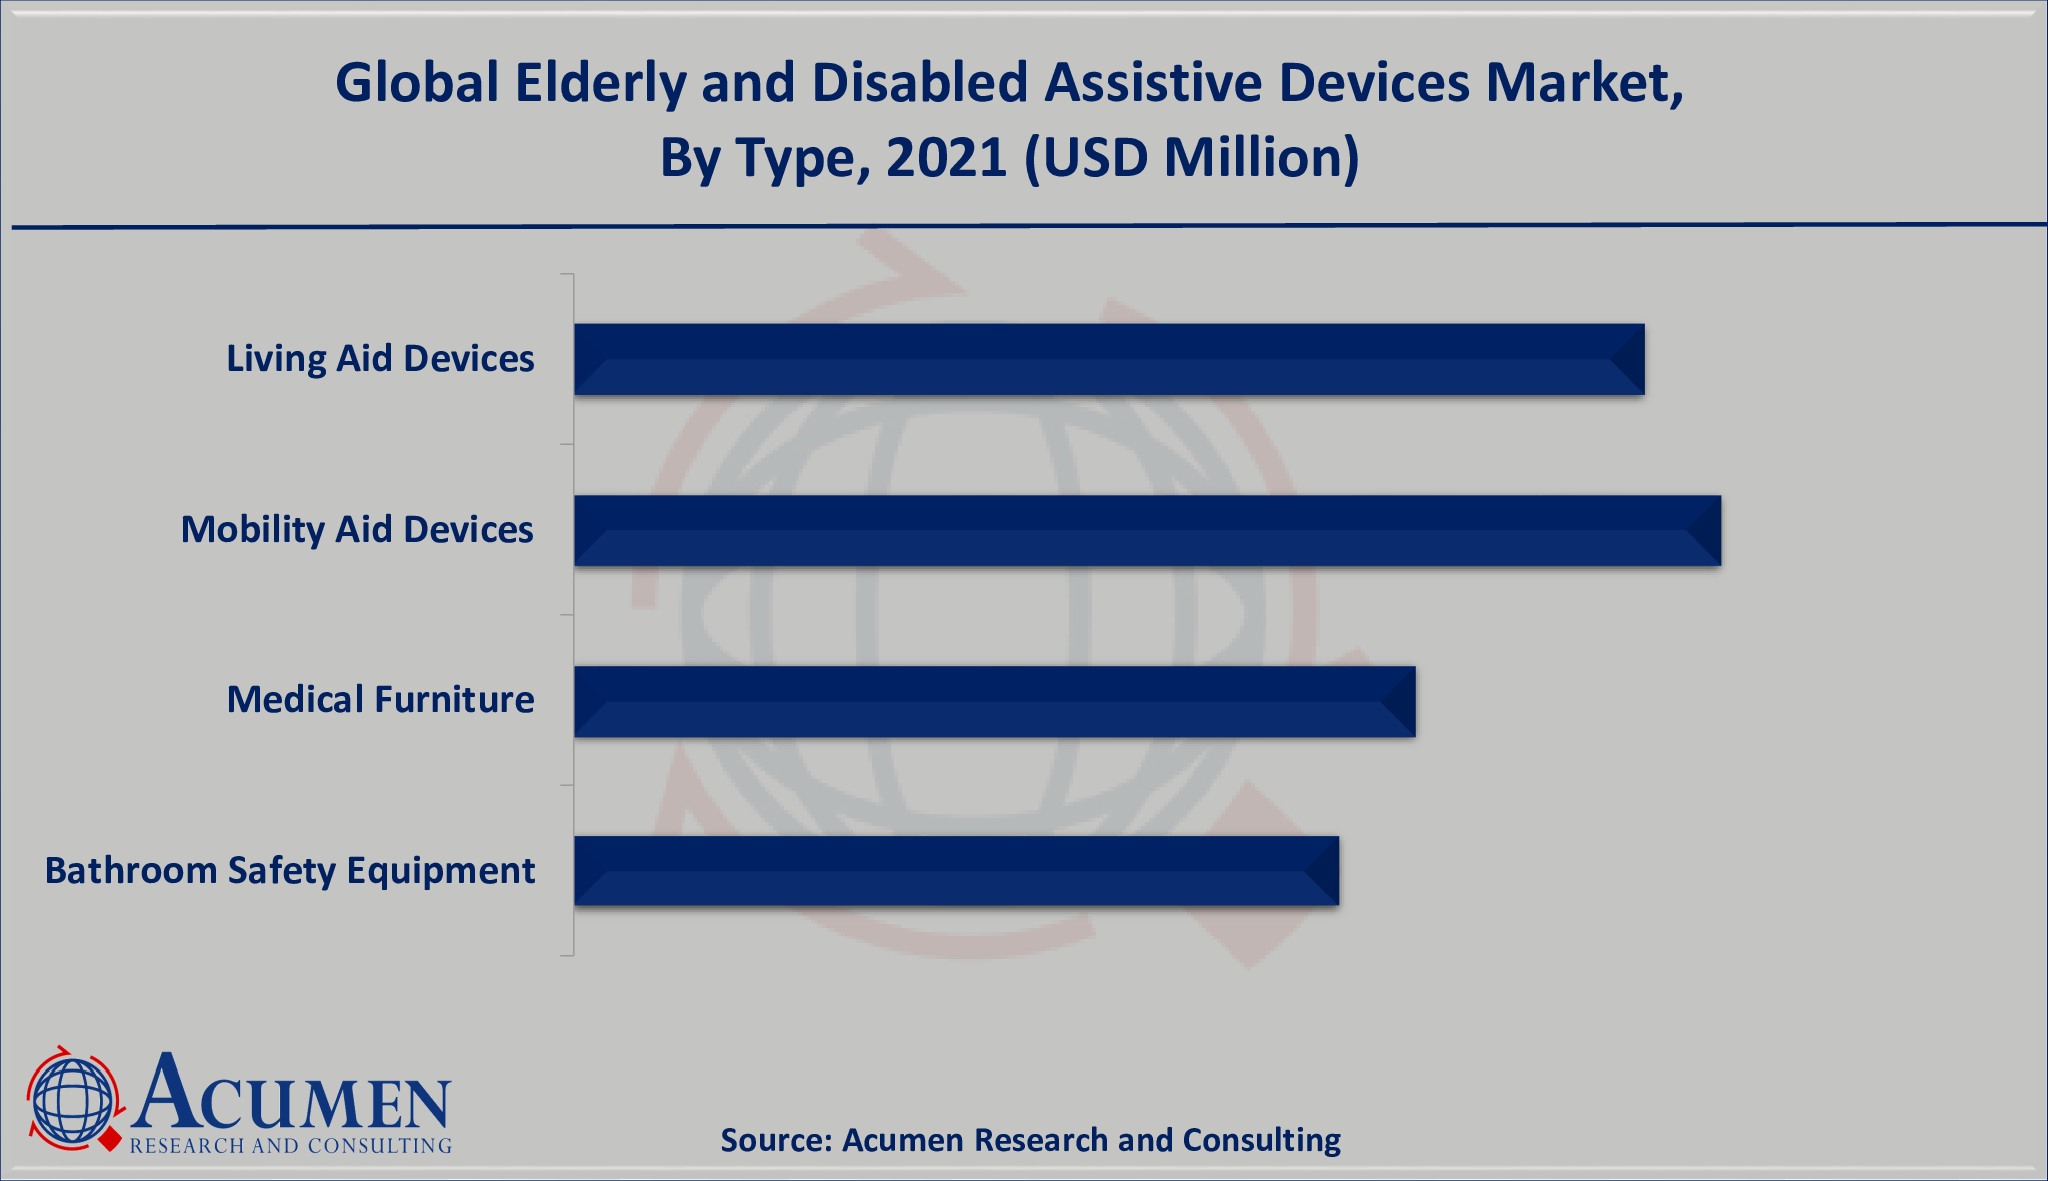 Elderly and Disabled Assistive Devices Market Share is valued at USD 22,439 Million in 2021 and is projected to reach a market size of USD 37,263 Million by 2030; growing at a CAGR of 5.9%.